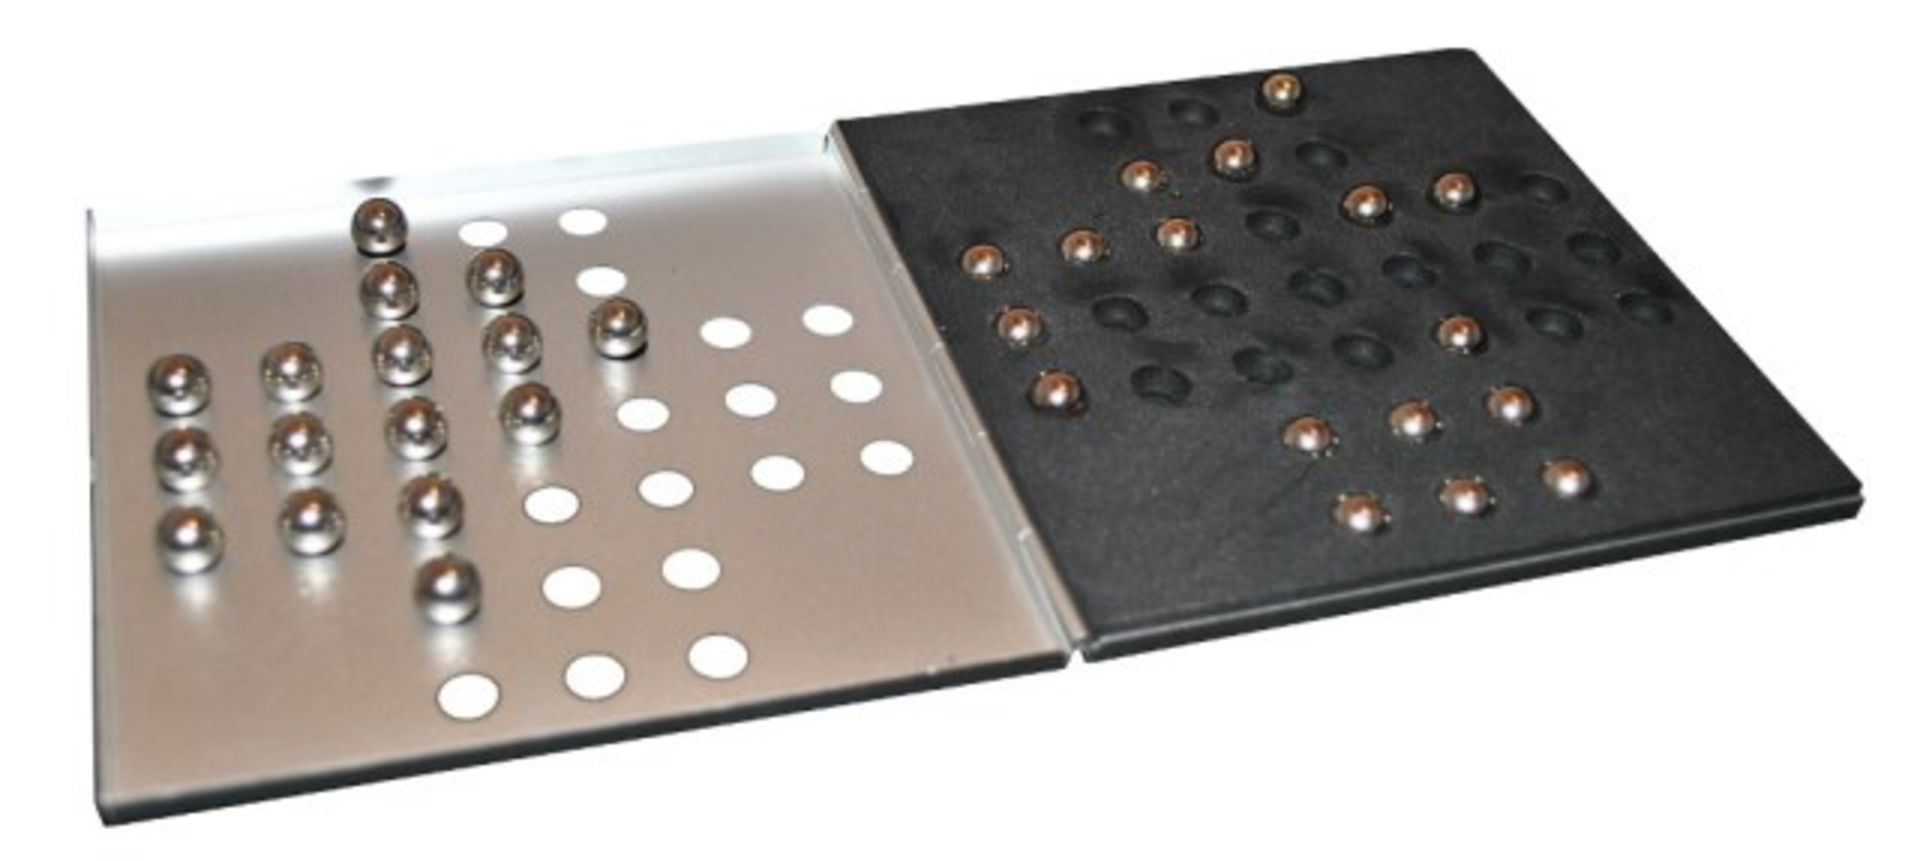 V Brand New Solitaire Classic Desk Game With 33 Stainless Steel Balls In Aluminium Case